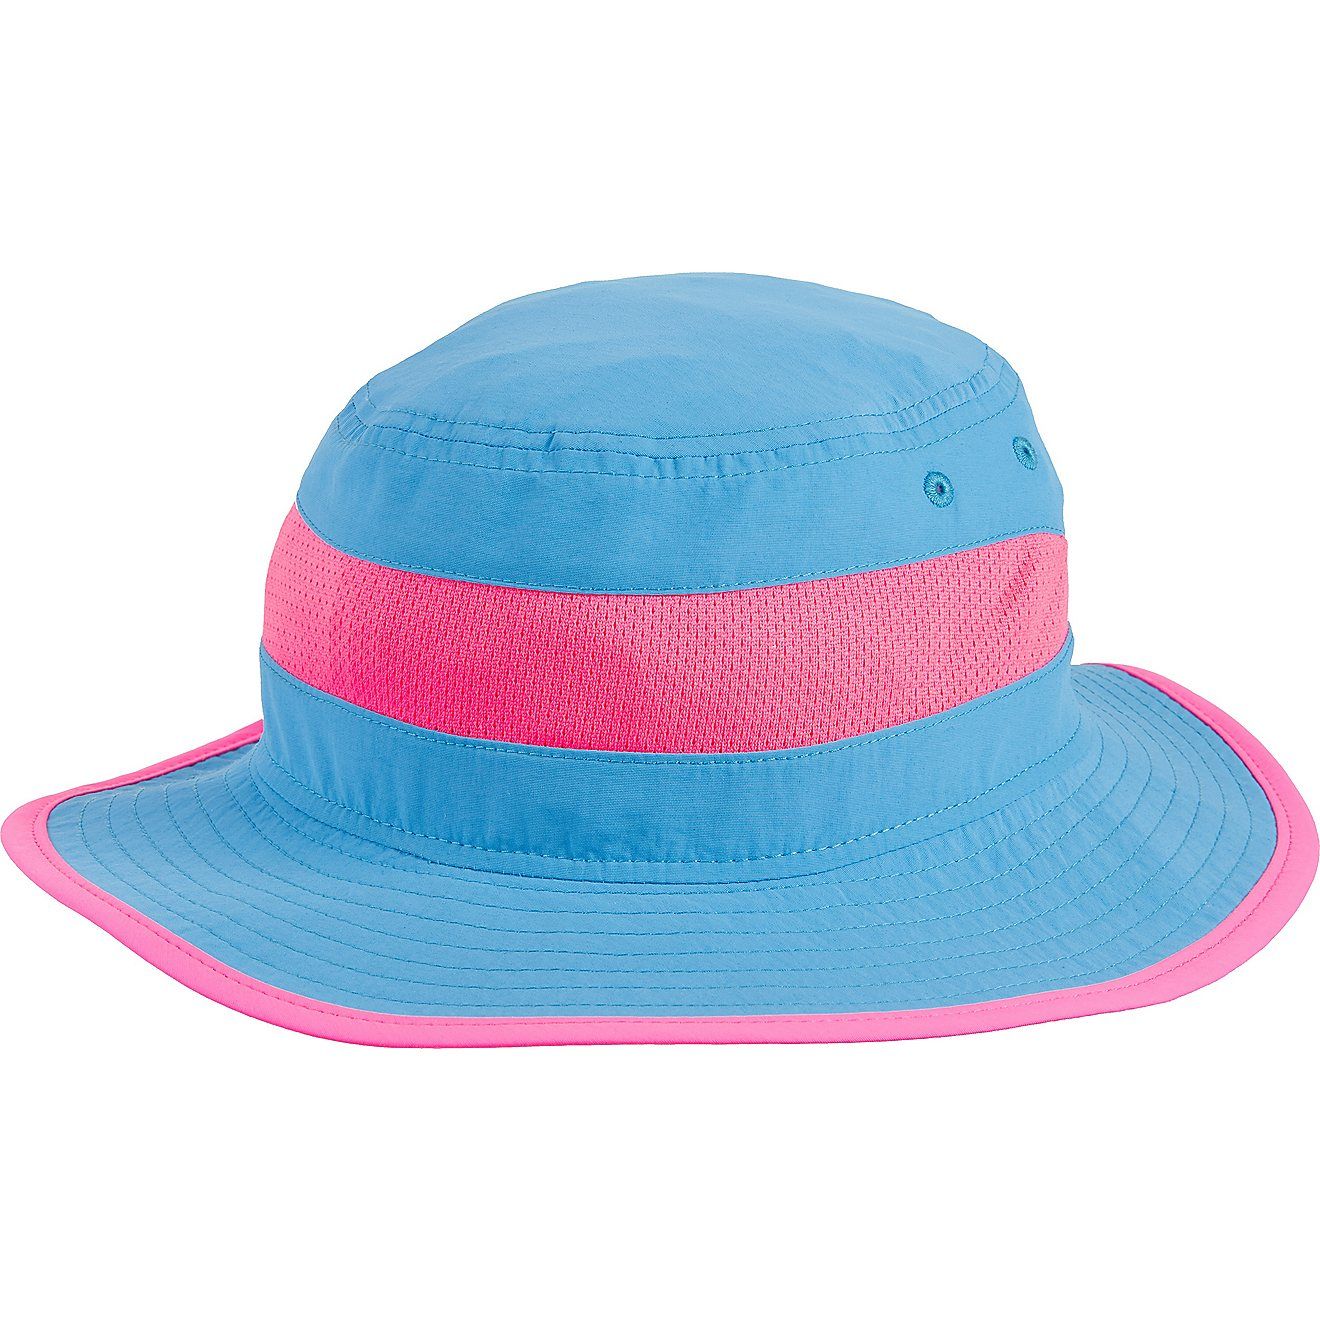 O'Rageous Girls' Colorblock Bucket Hat | Academy Sports + Outdoor Affiliate